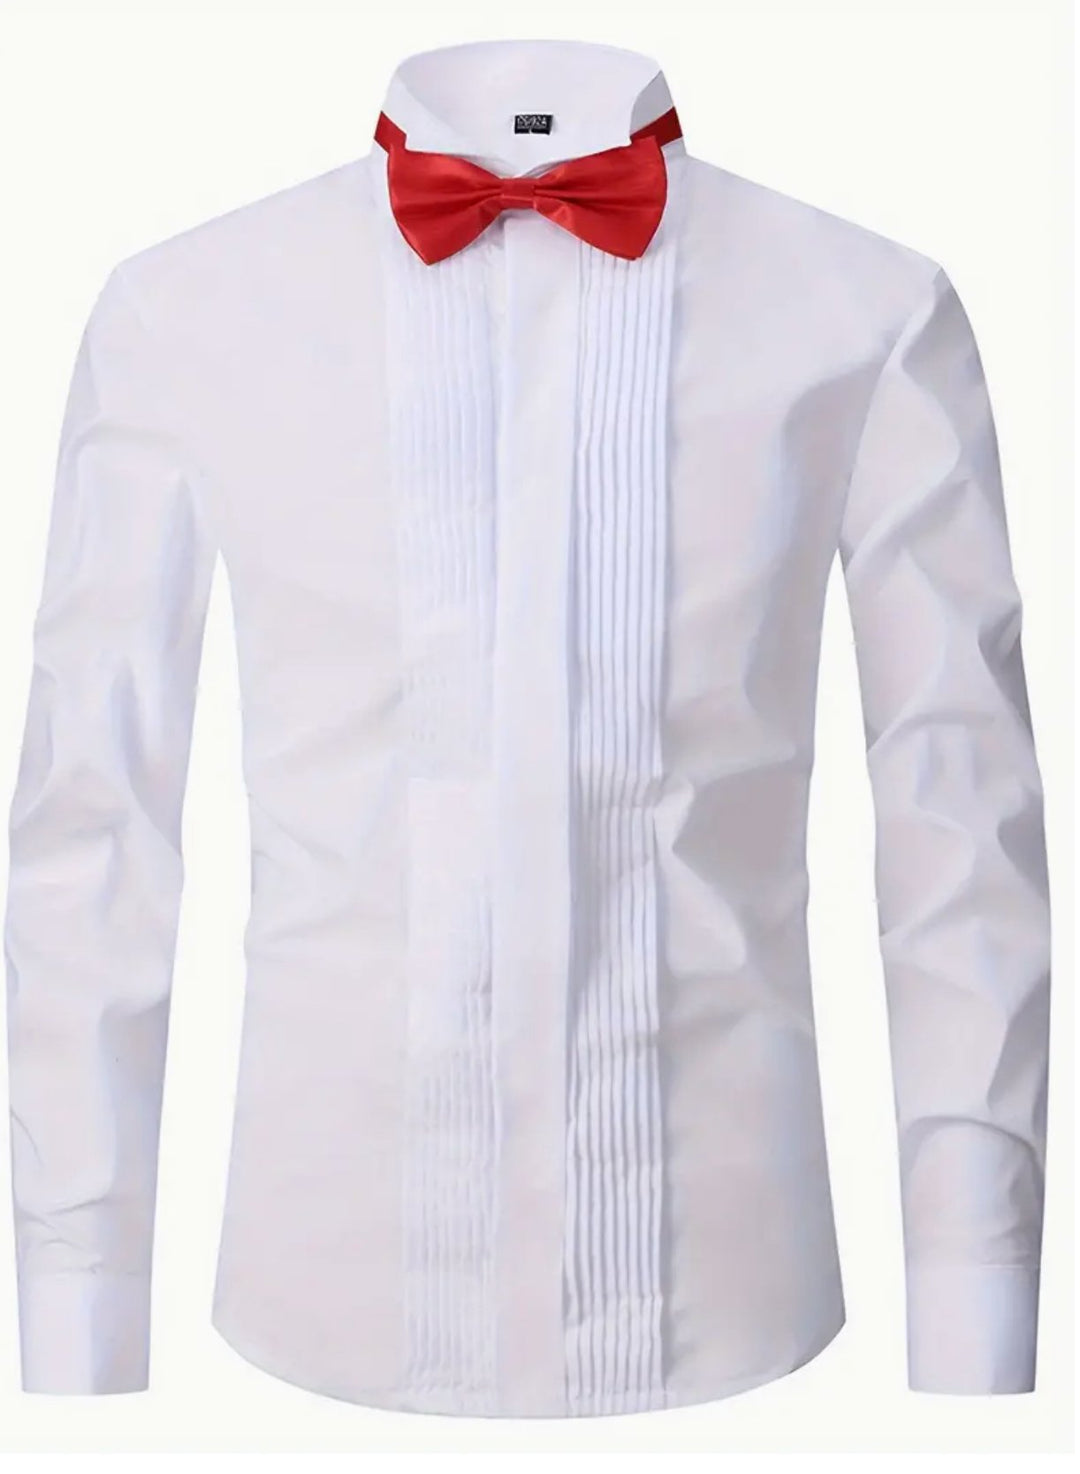 Men's Solid Colour Turndown Collar Dress Shirt For Banquet Wedding Bridesman With Two Ties (One Black And One Red) And With Random Cufflinks - YK37622 - SimonVon Shop